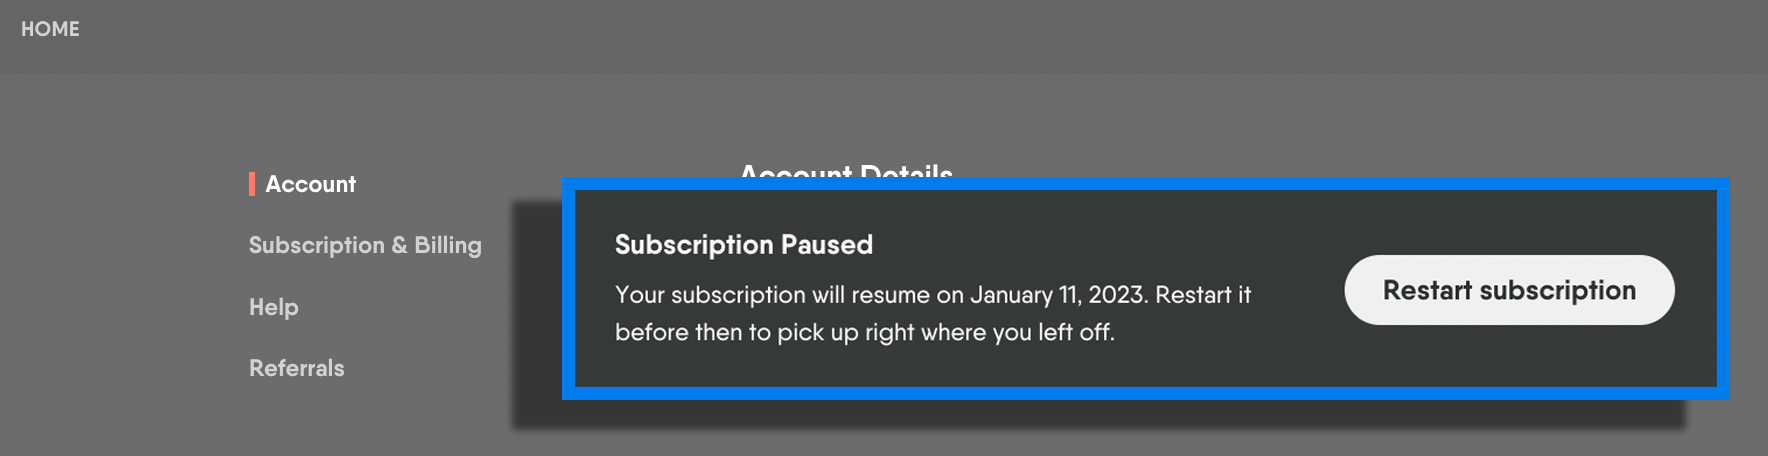 Details for a paused account on the Fubo MY ACCOUNT page including the date the accont will un-pause and a RESTART SUBSCRIPTION button to restart early